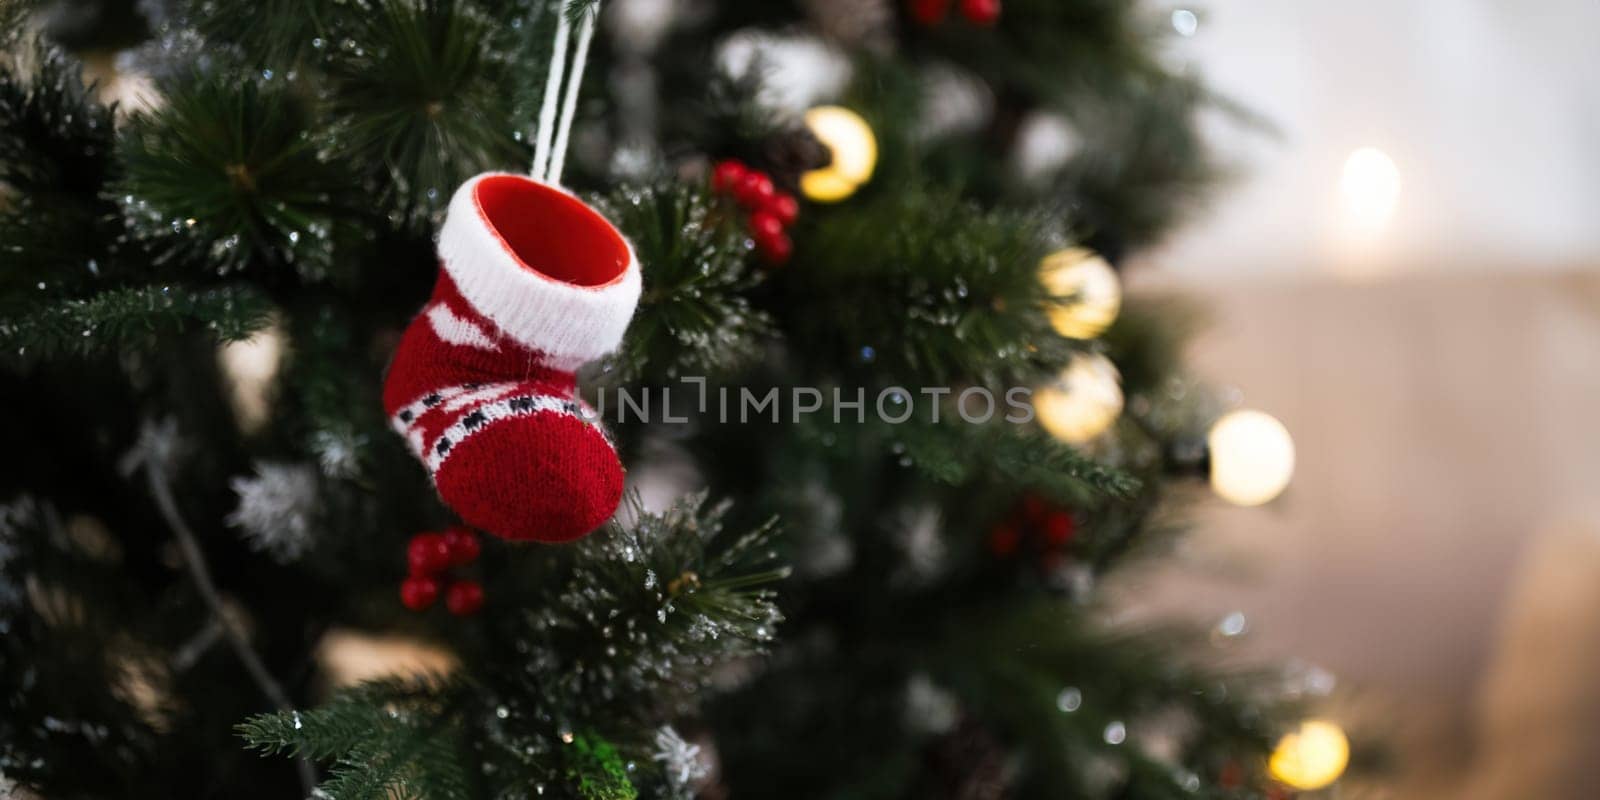 Background Christmas Tree and Stockings with Decorations Near a Fireplace with Lights.